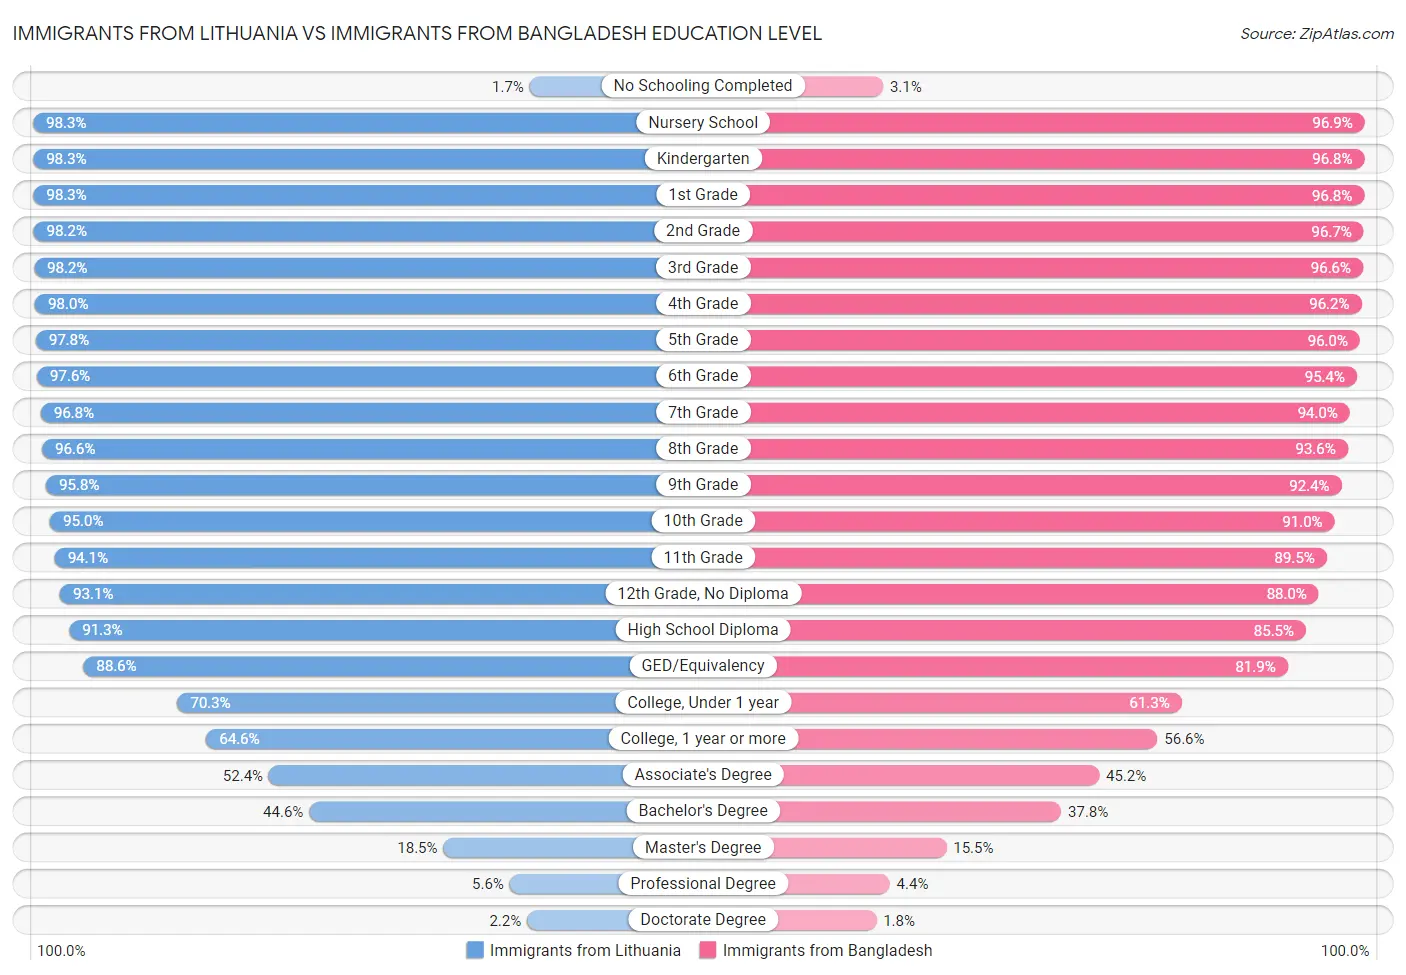 Immigrants from Lithuania vs Immigrants from Bangladesh Education Level